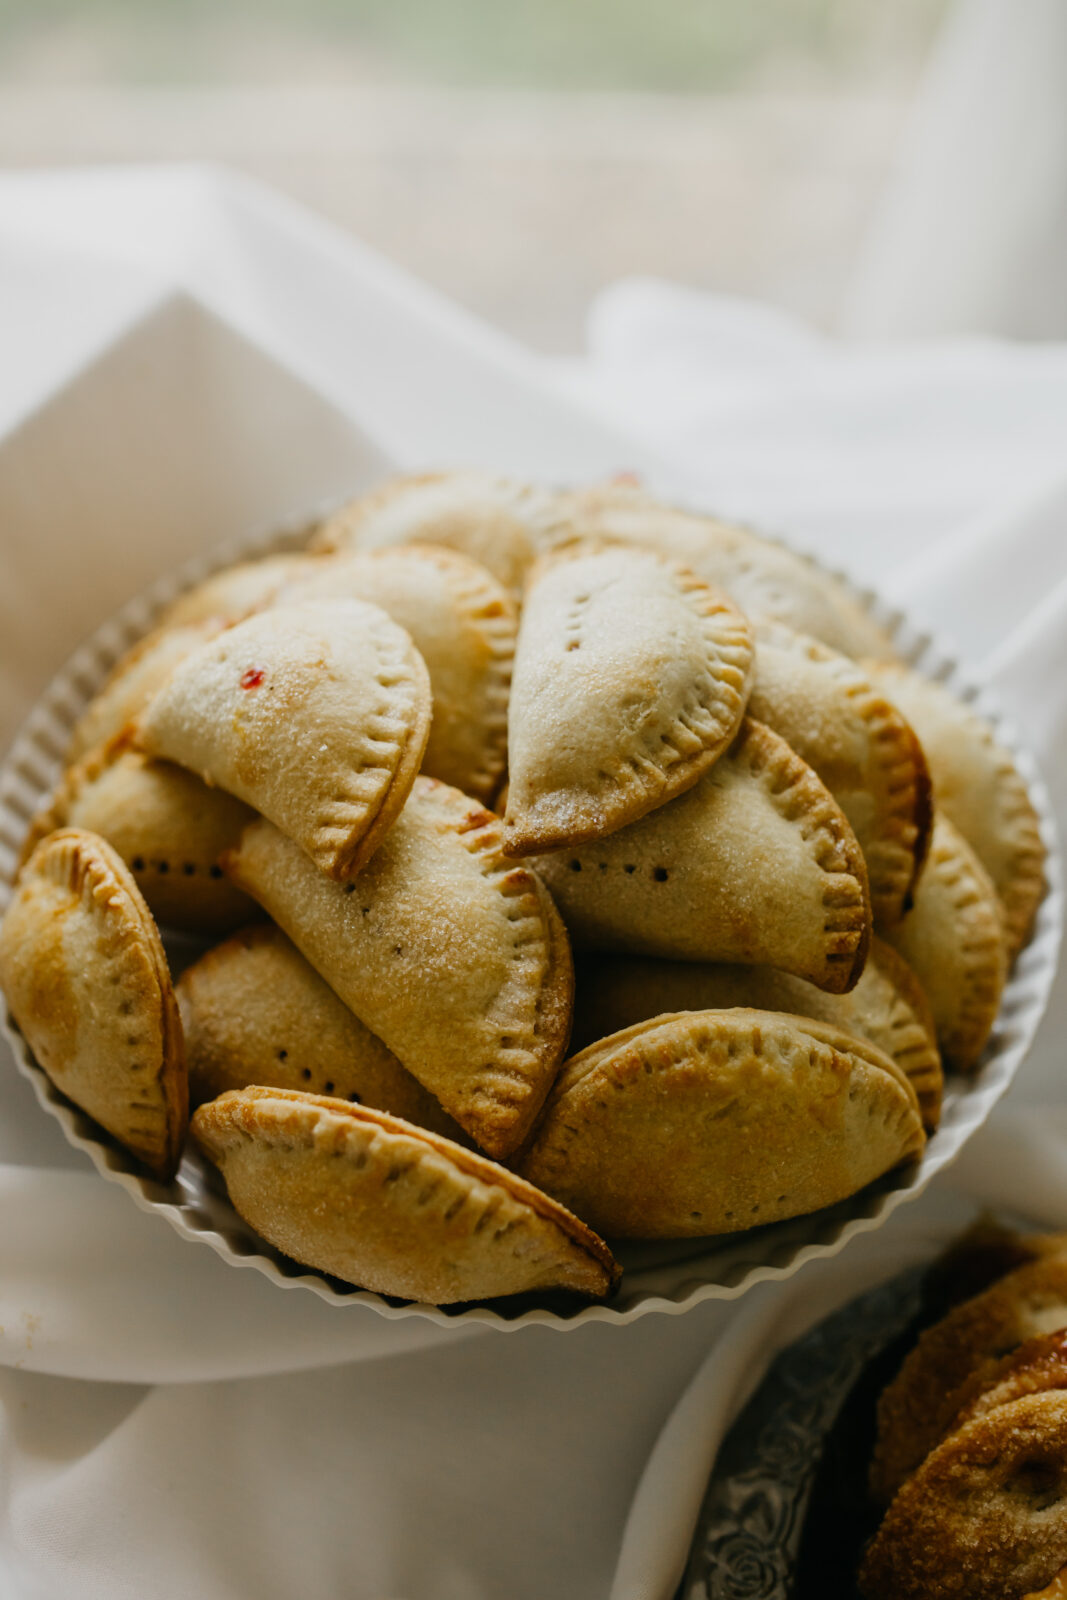 Photo of empanadas served during the wedding day